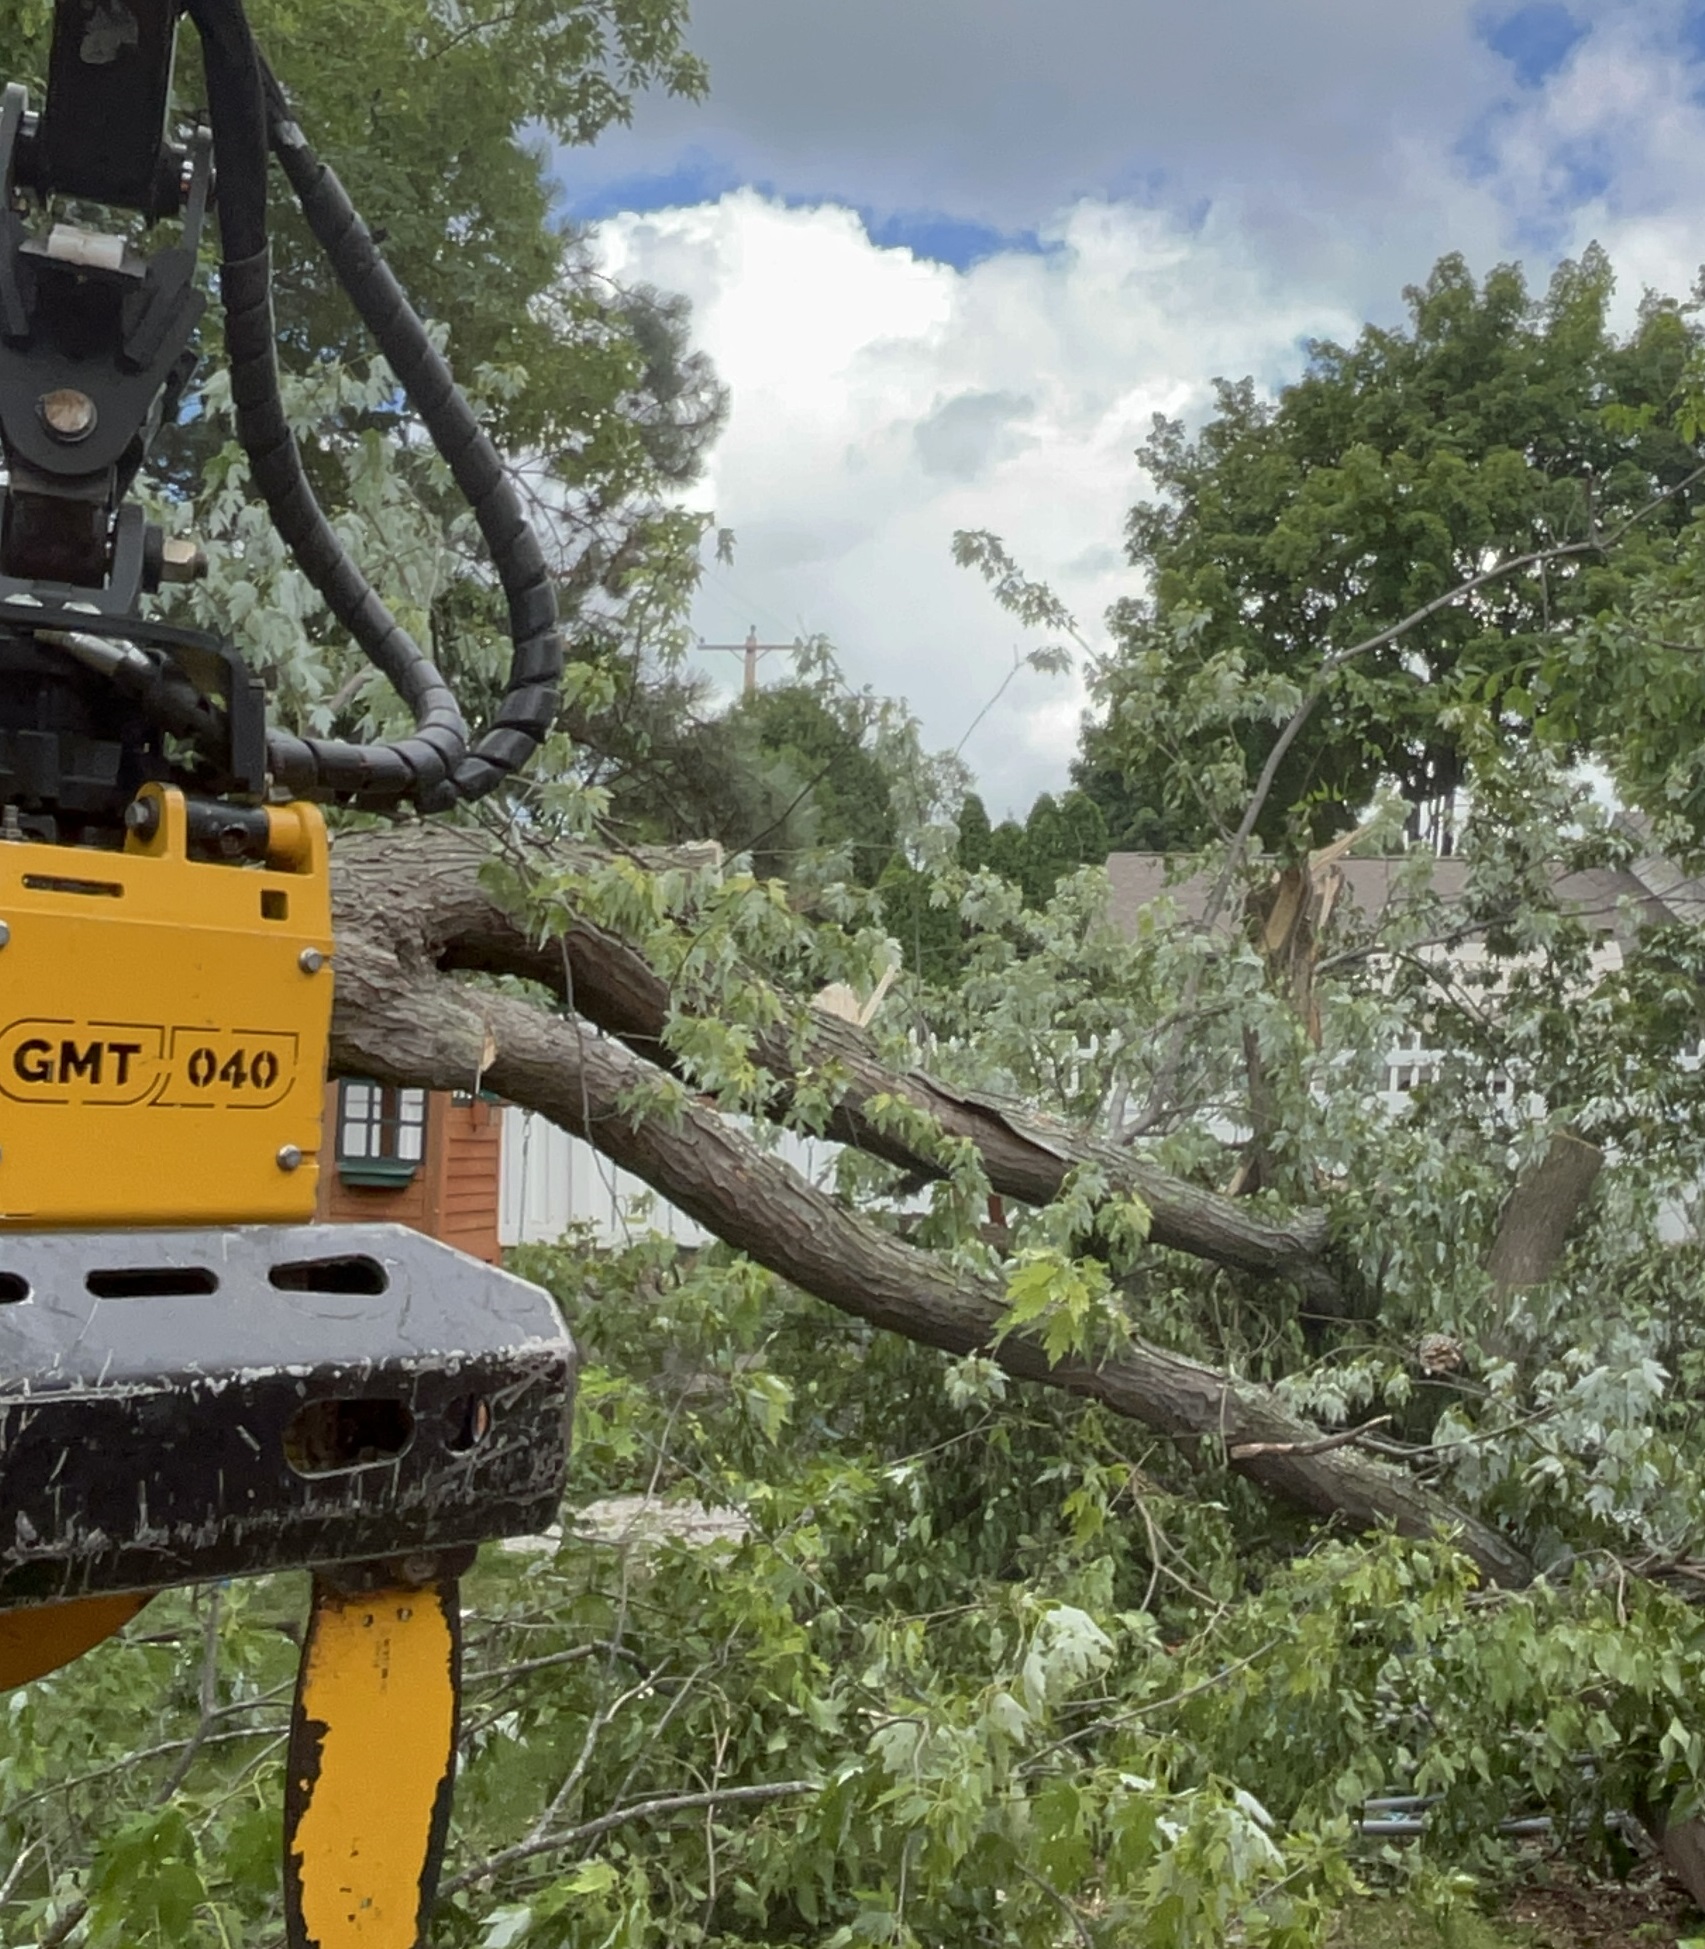 safe emergency tree removals after storm damage in southeast WI